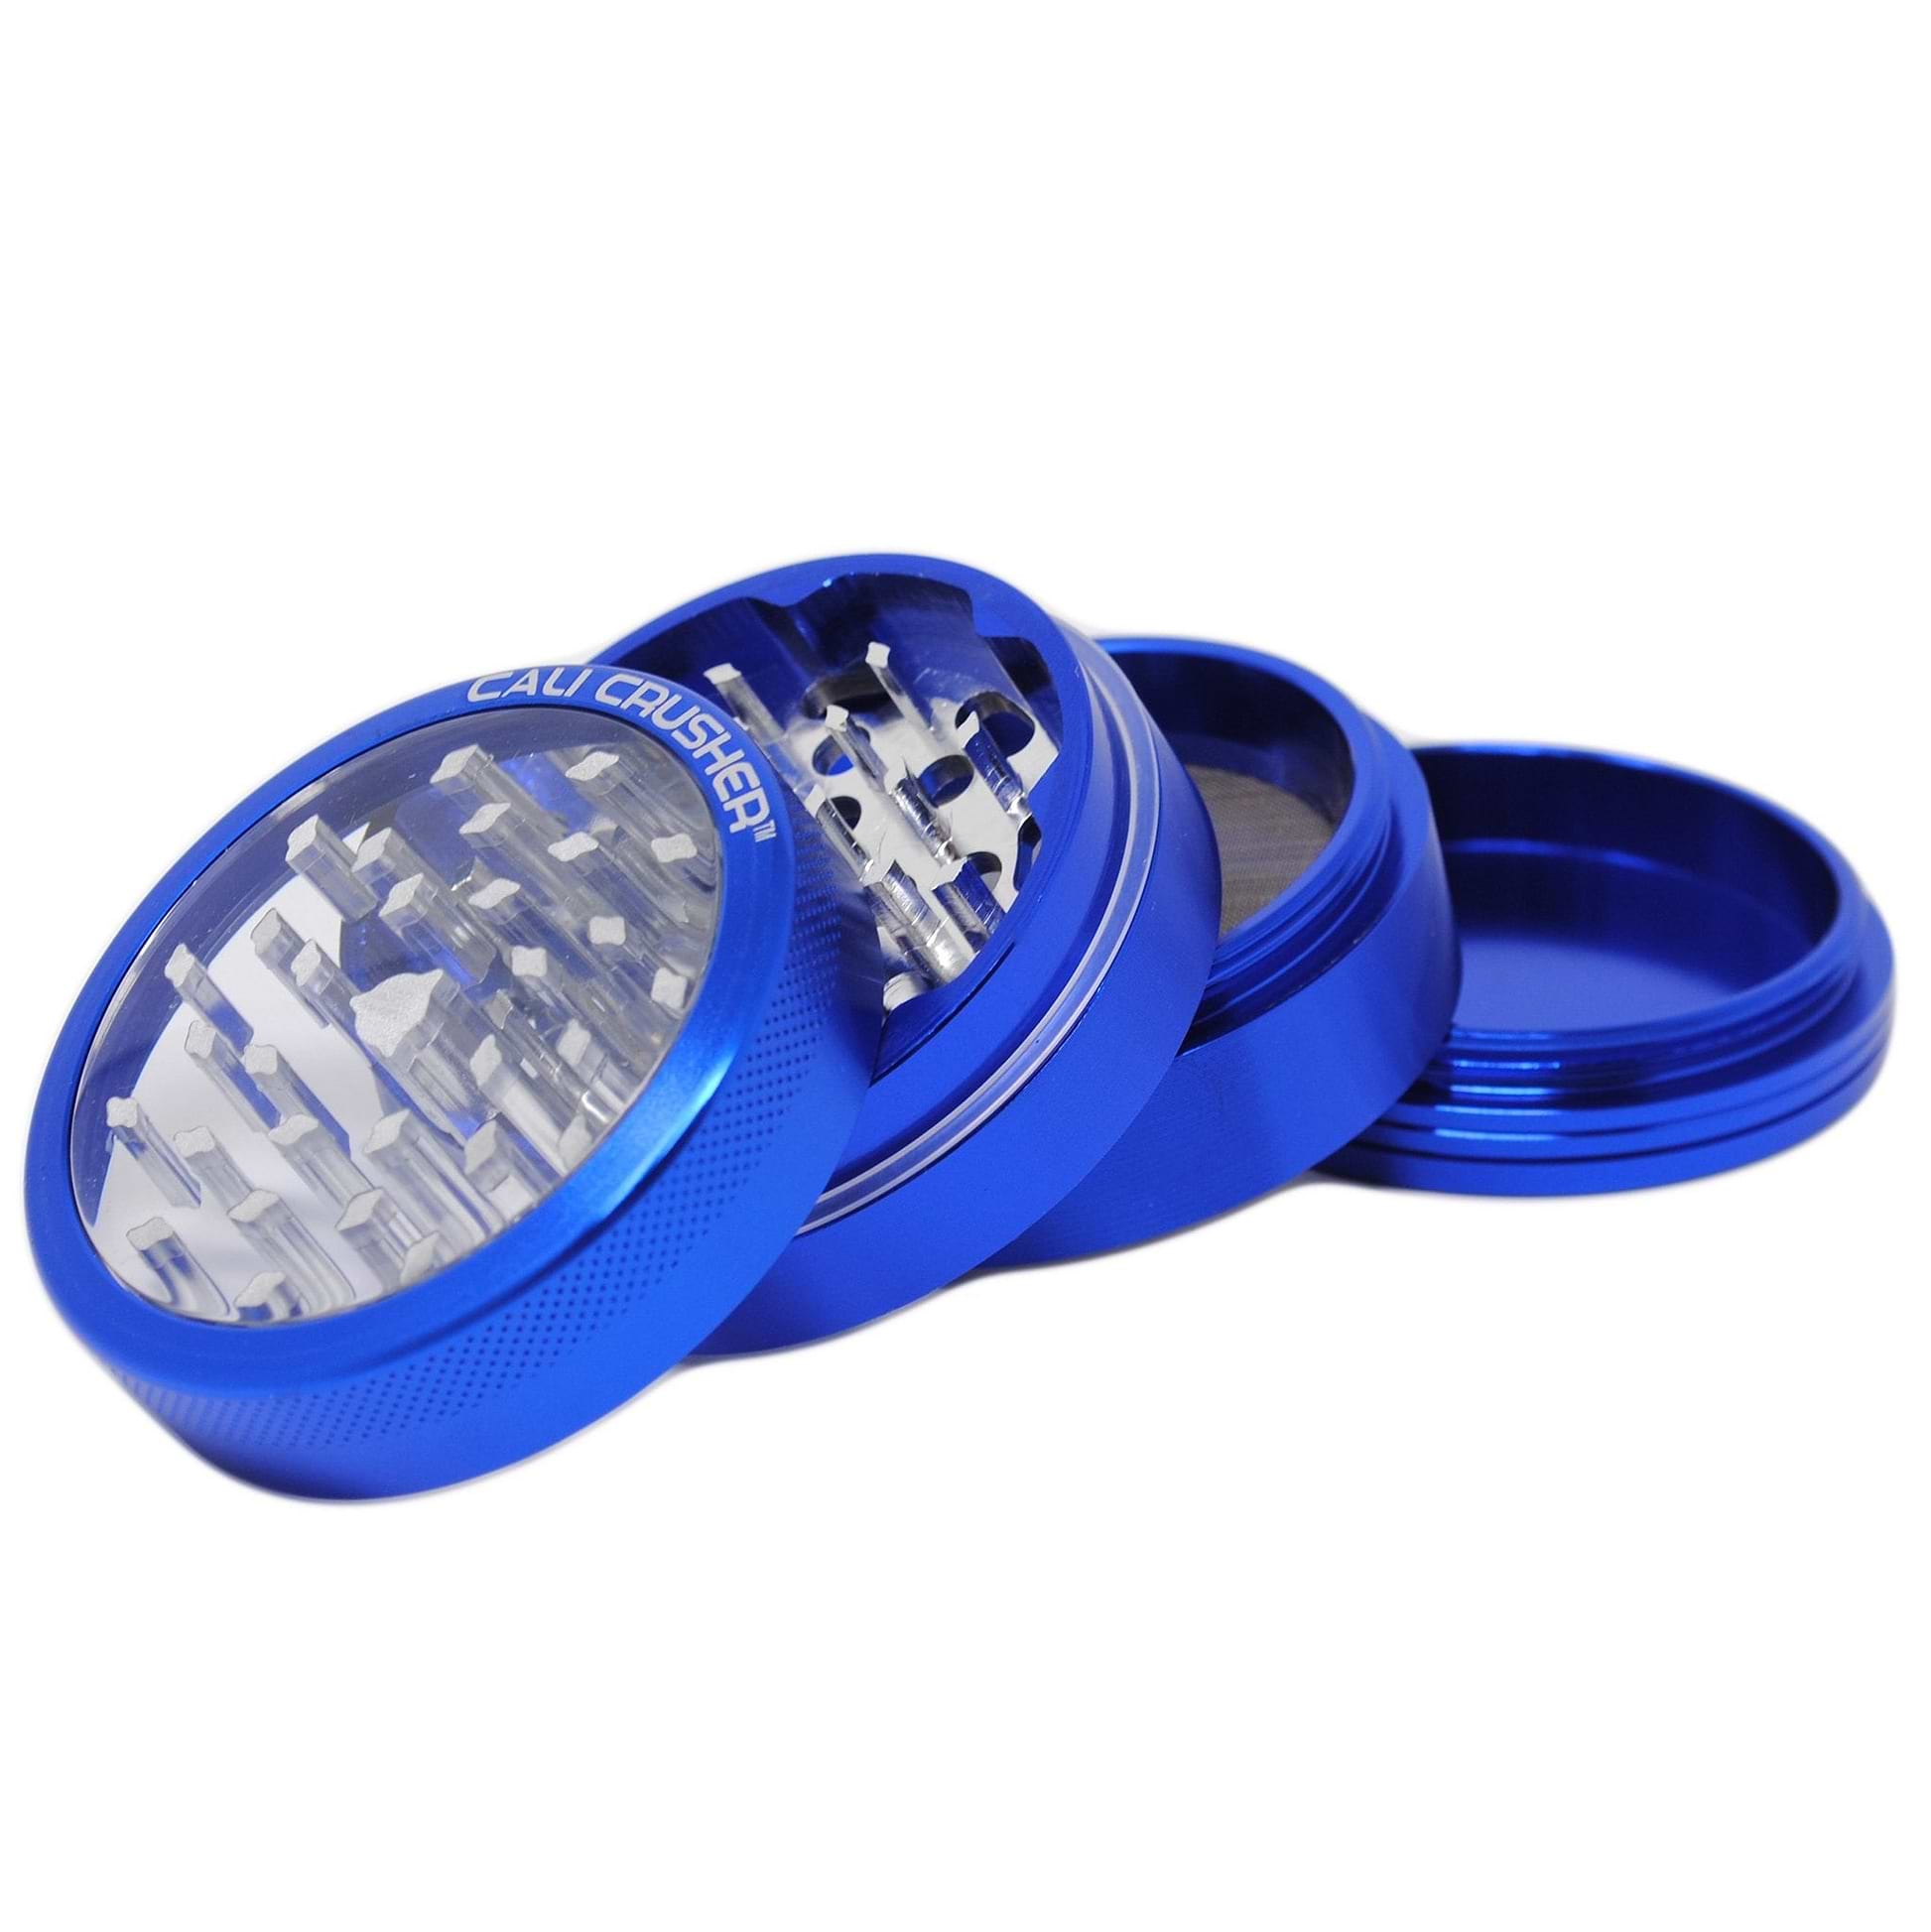 Cali Crusher Clear Top 4 Piece Herb Grinder - 62mm